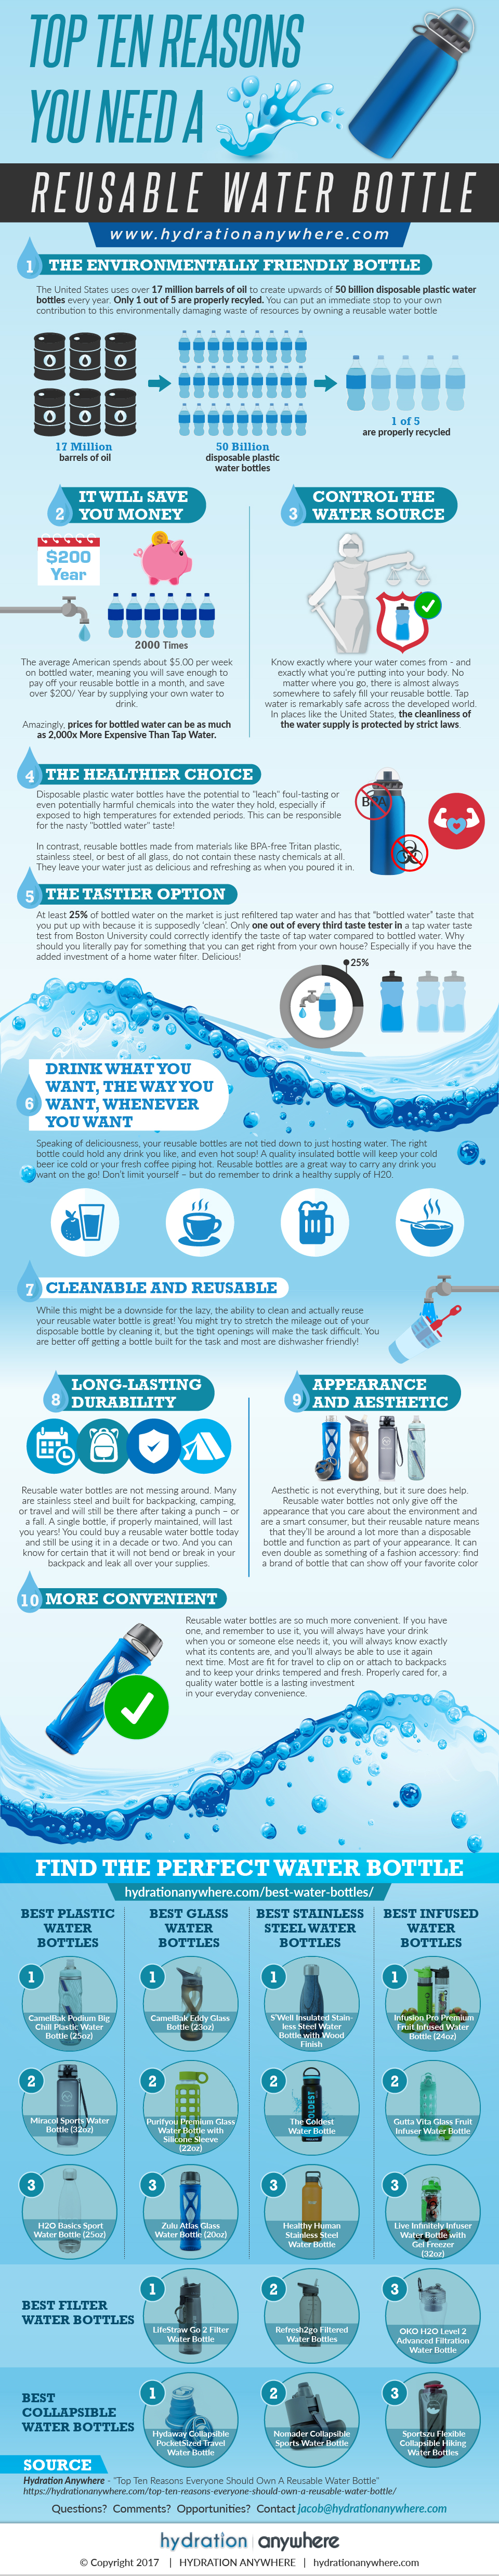 Top Ten Reasons You Need a Reusable Water Bottle by Hydration Anywhere